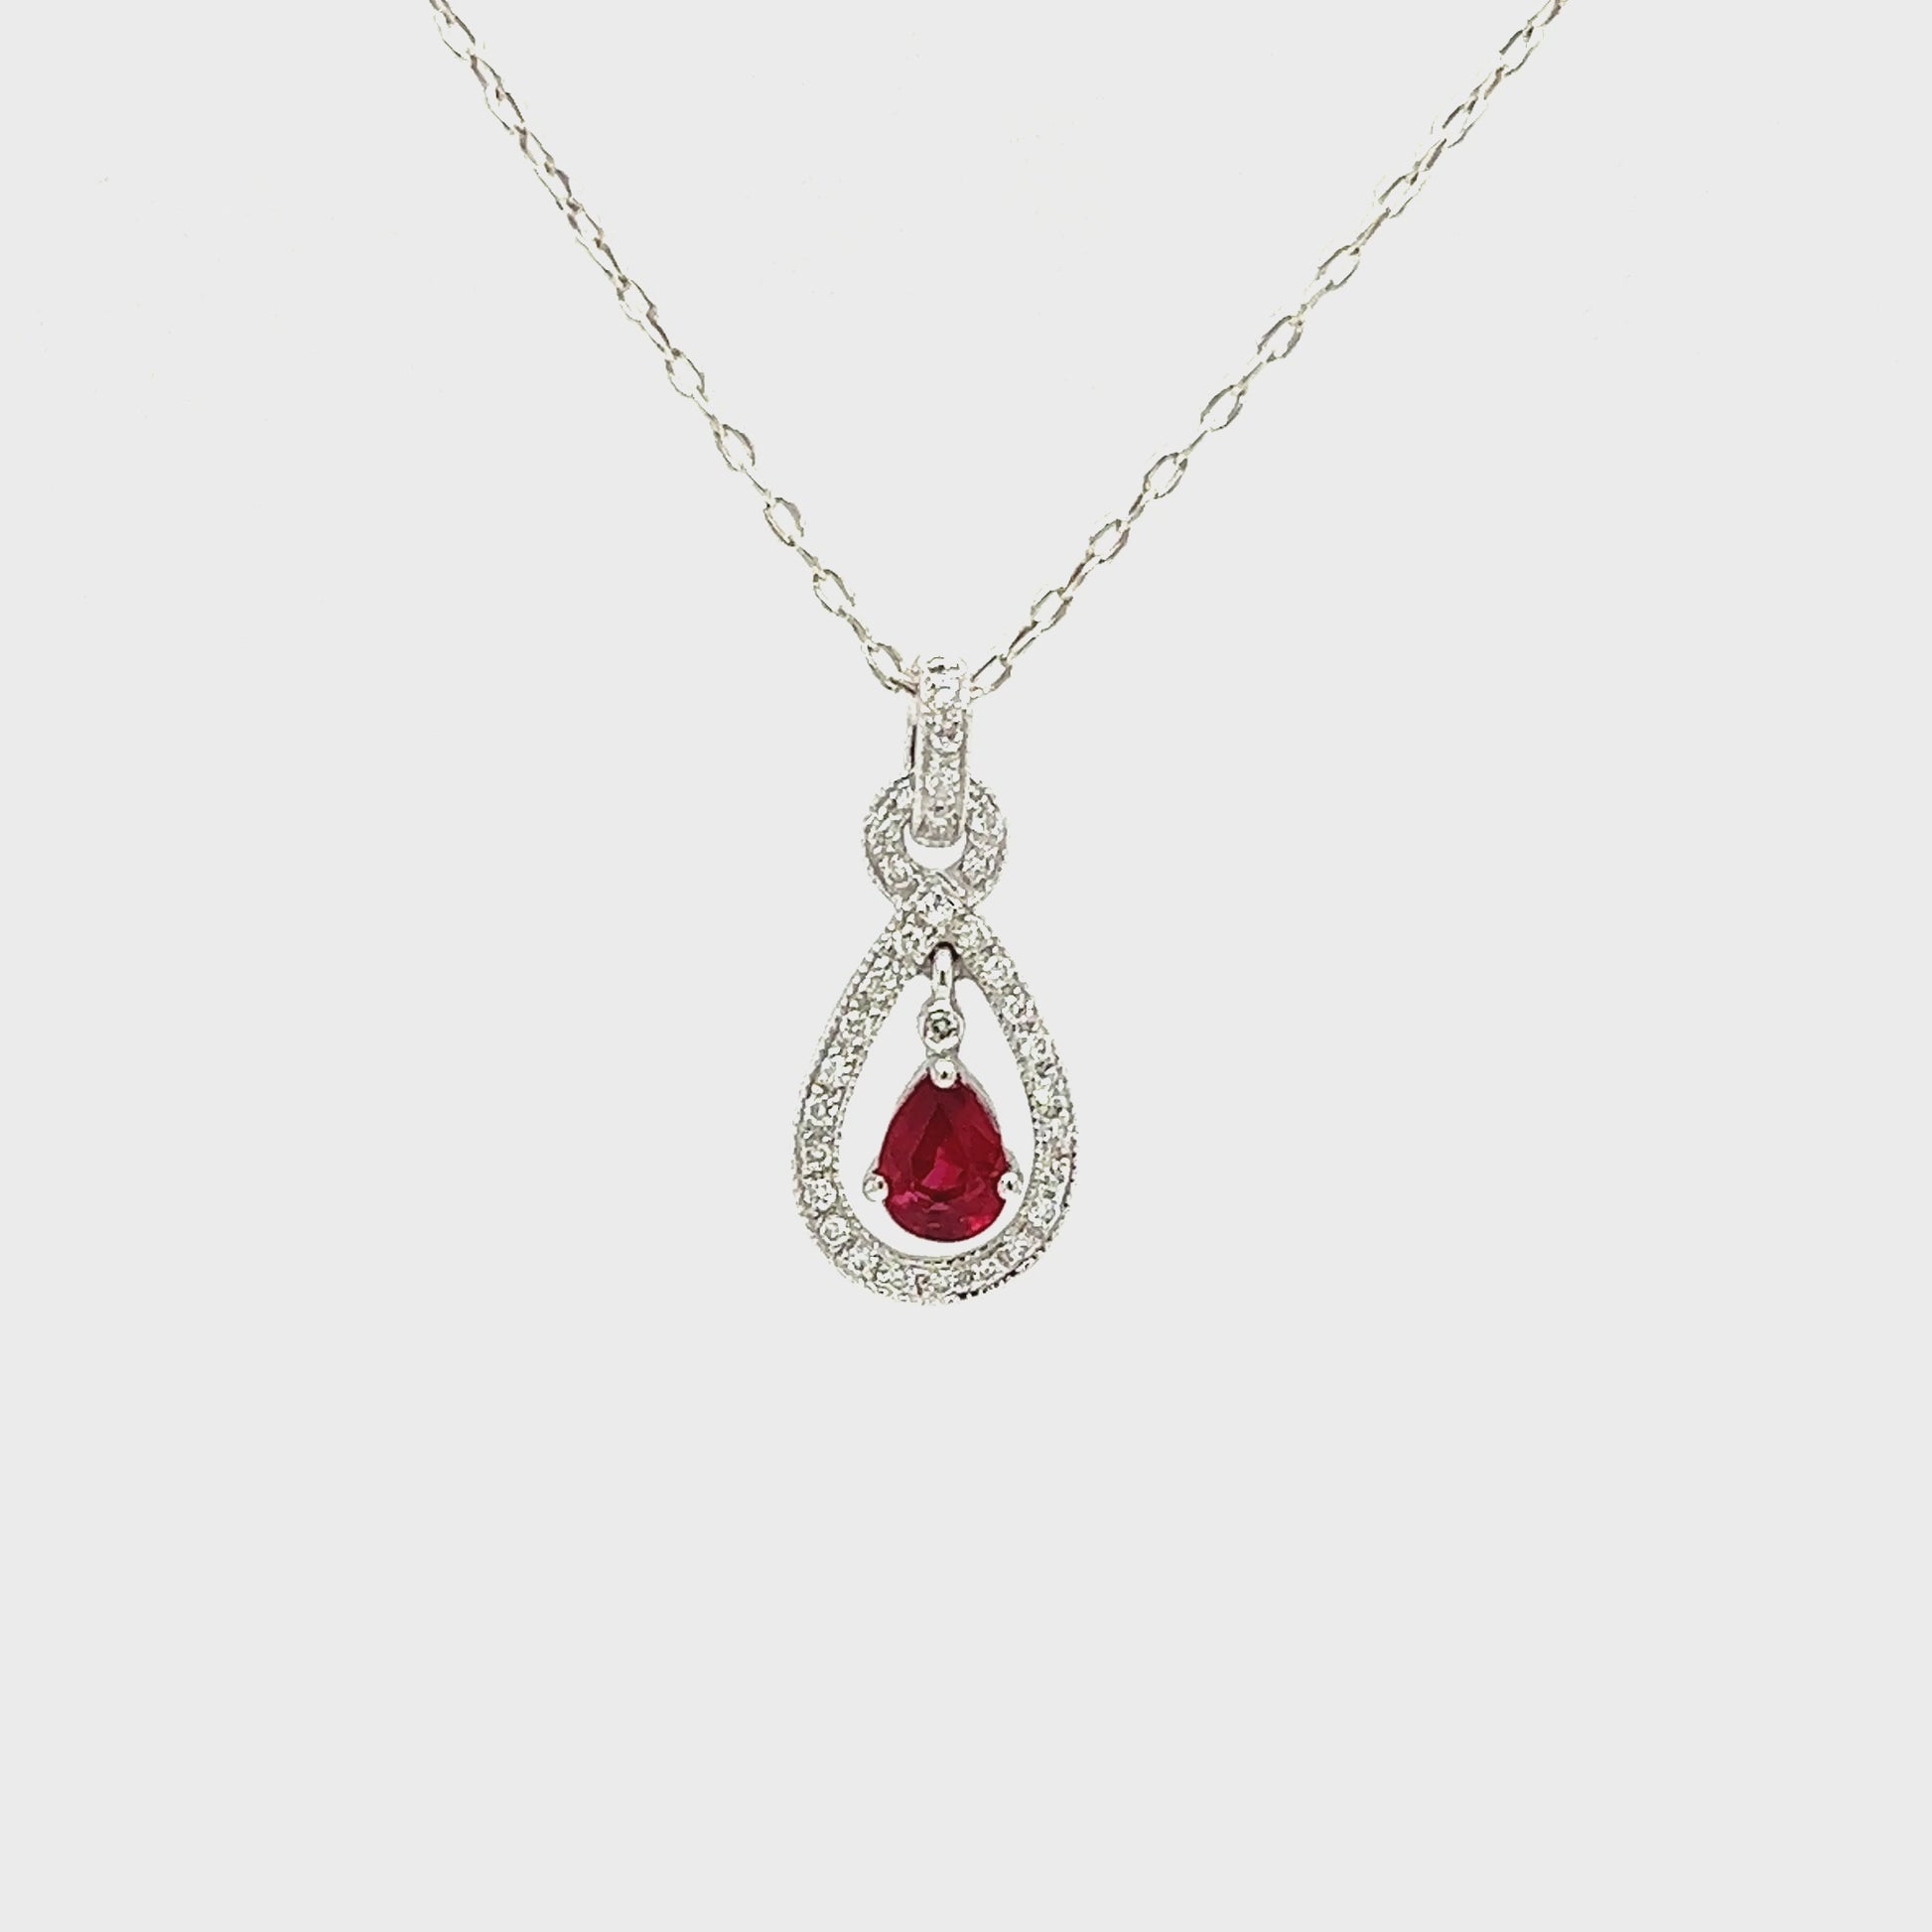 Dangling Pear Ruby Pendant with Diamond Accents in 14K White Gold Pendant and Chain Video